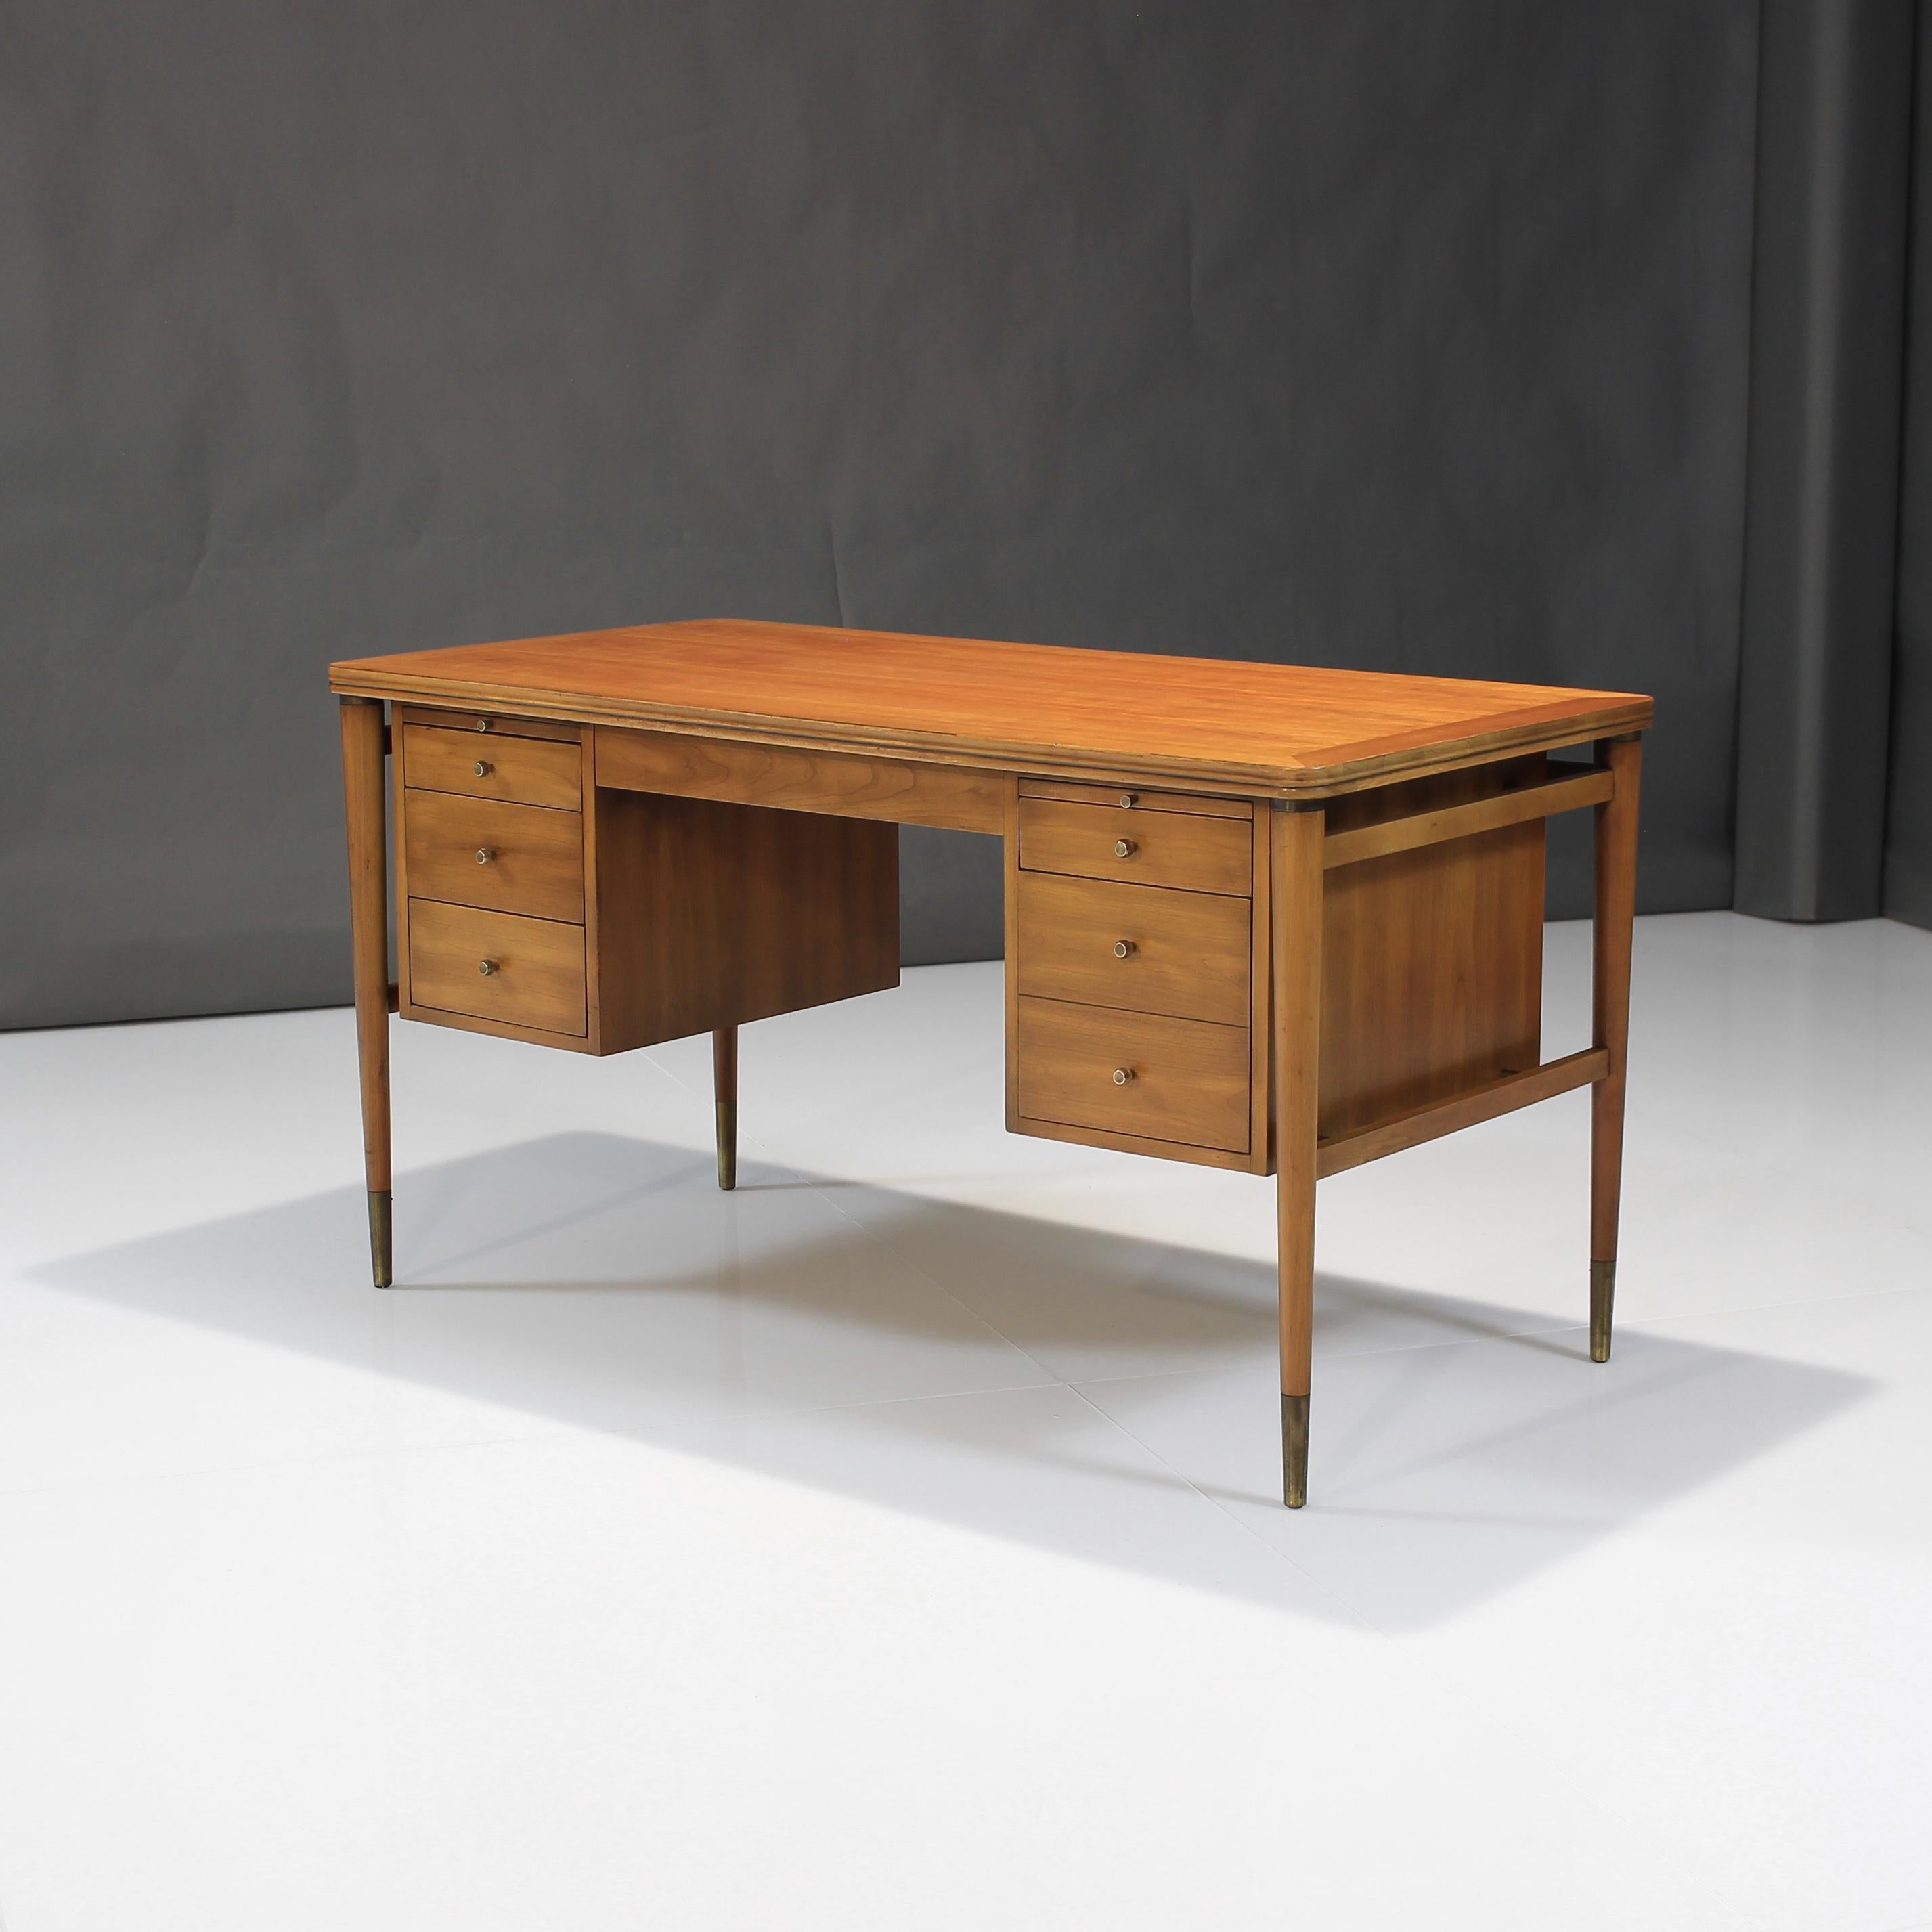 Presenting this exceptional desk by John Widdicomb.

We've had many desks come through our collection and this Desk by Widdicomb shows off some of the finest craftsmanship offered at the time of the Mid-20th Century.

Elevated in a stately